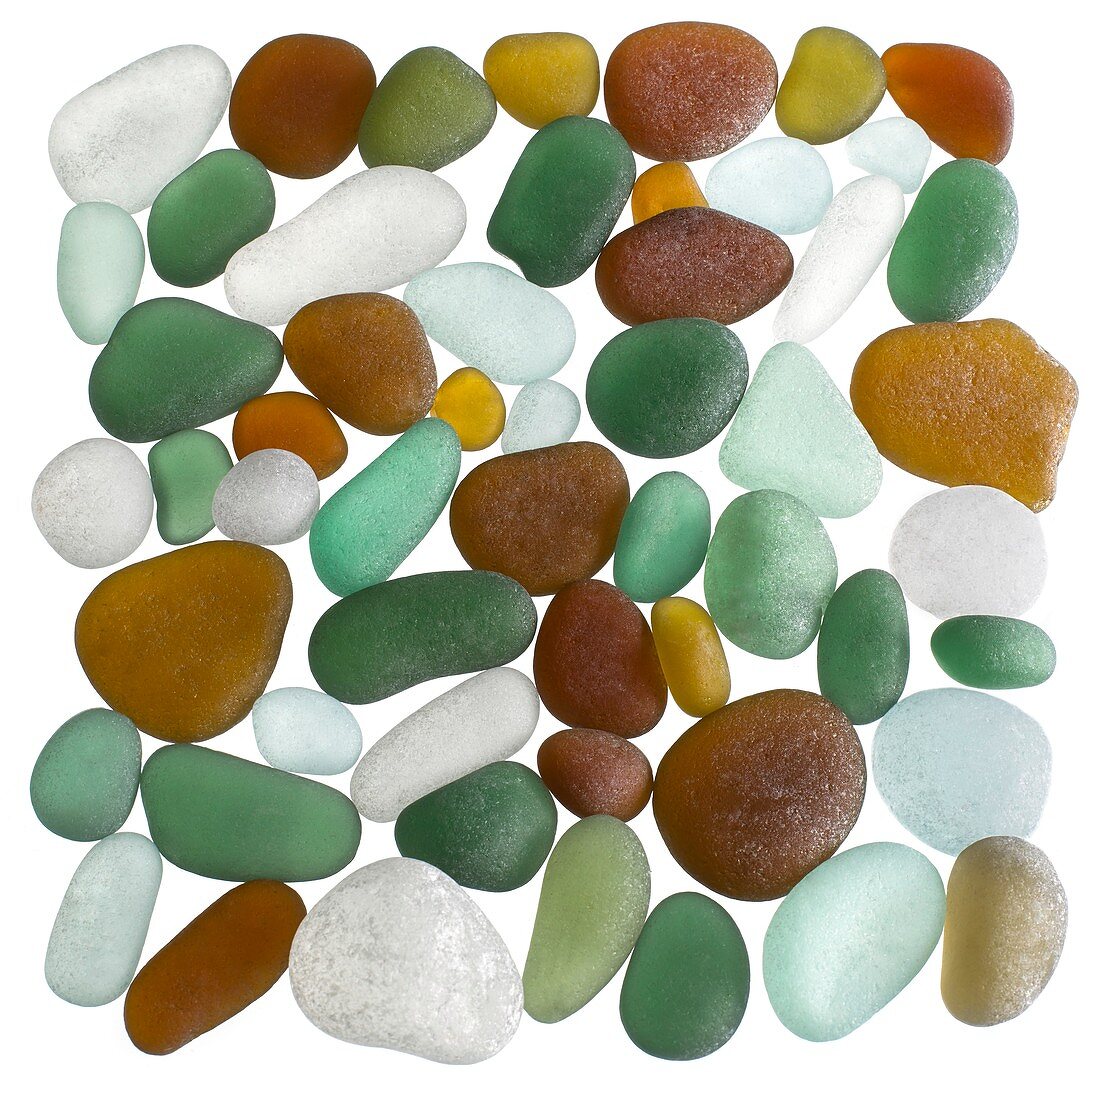 Pieces of sea glass